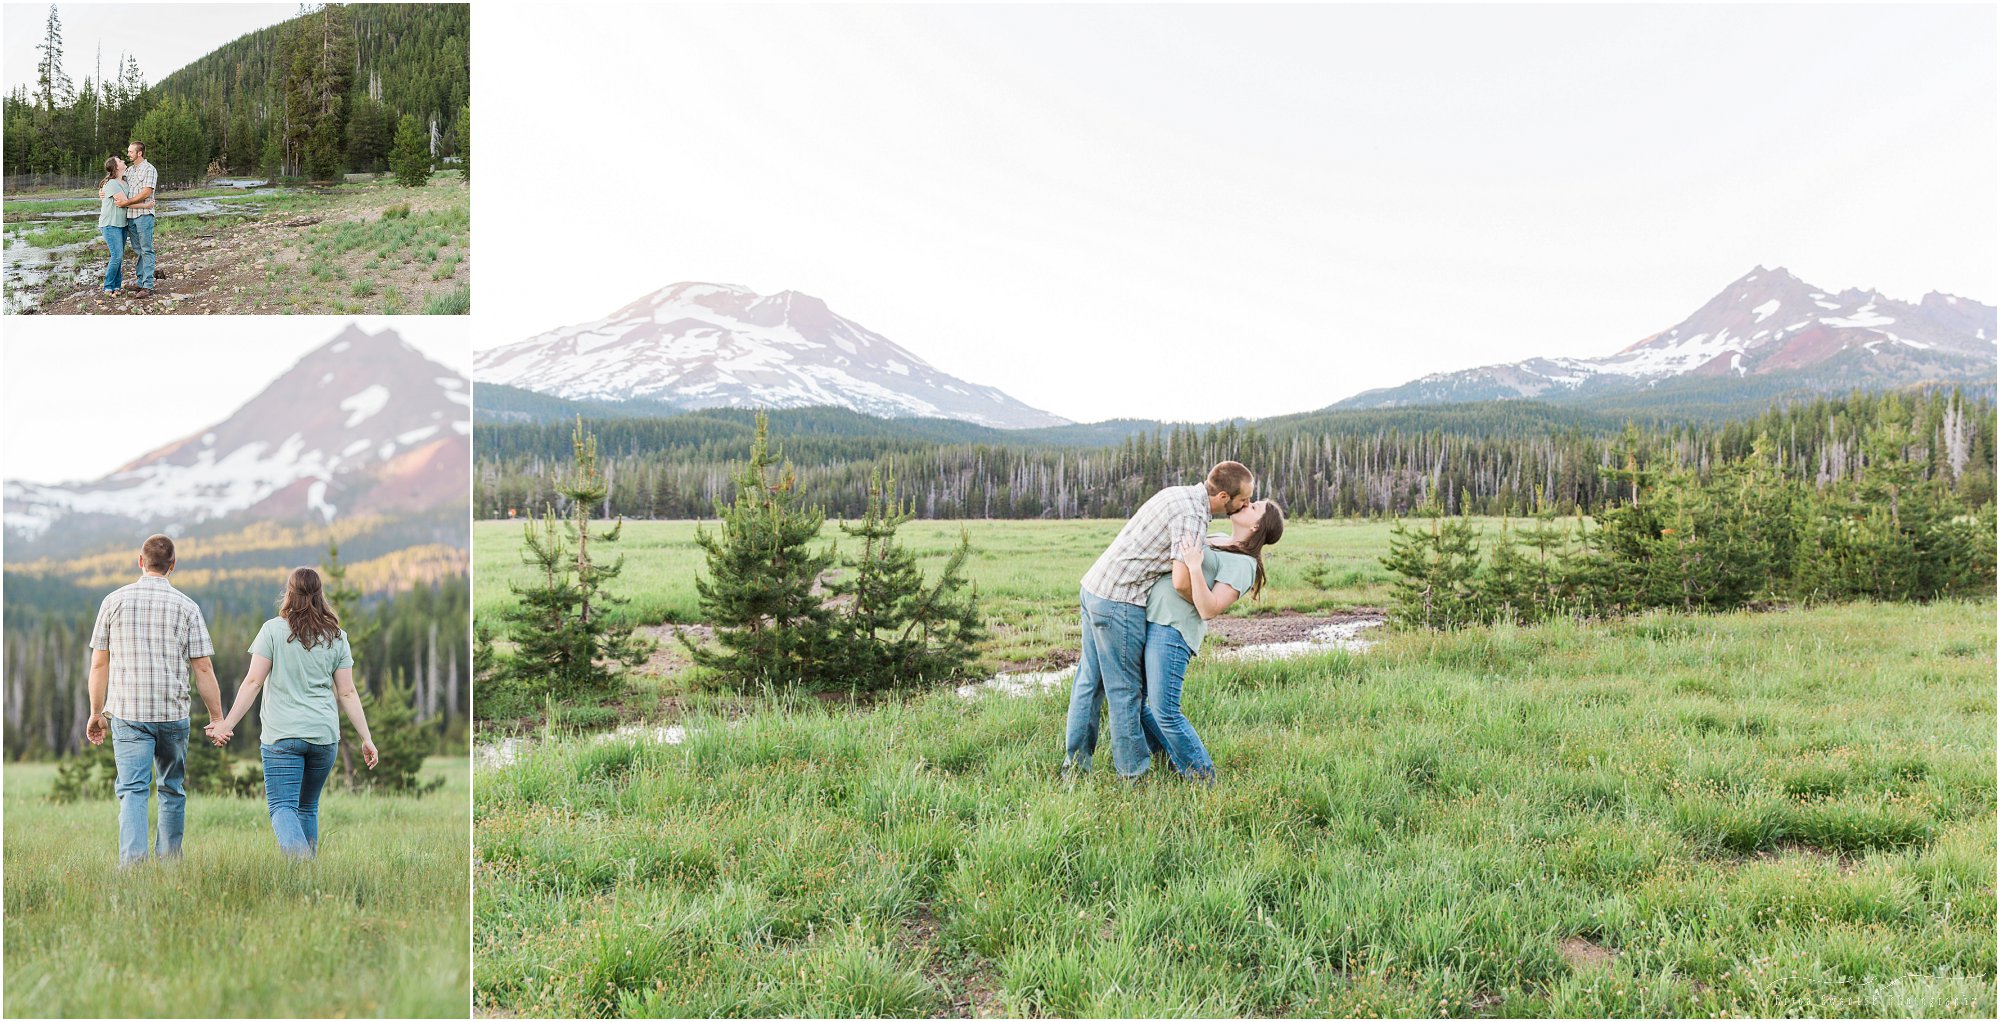 A cute groom to be dips his fiance at their Bend Oregon engagement photo session in the Cascade mountains. | Erica Swantek Photography